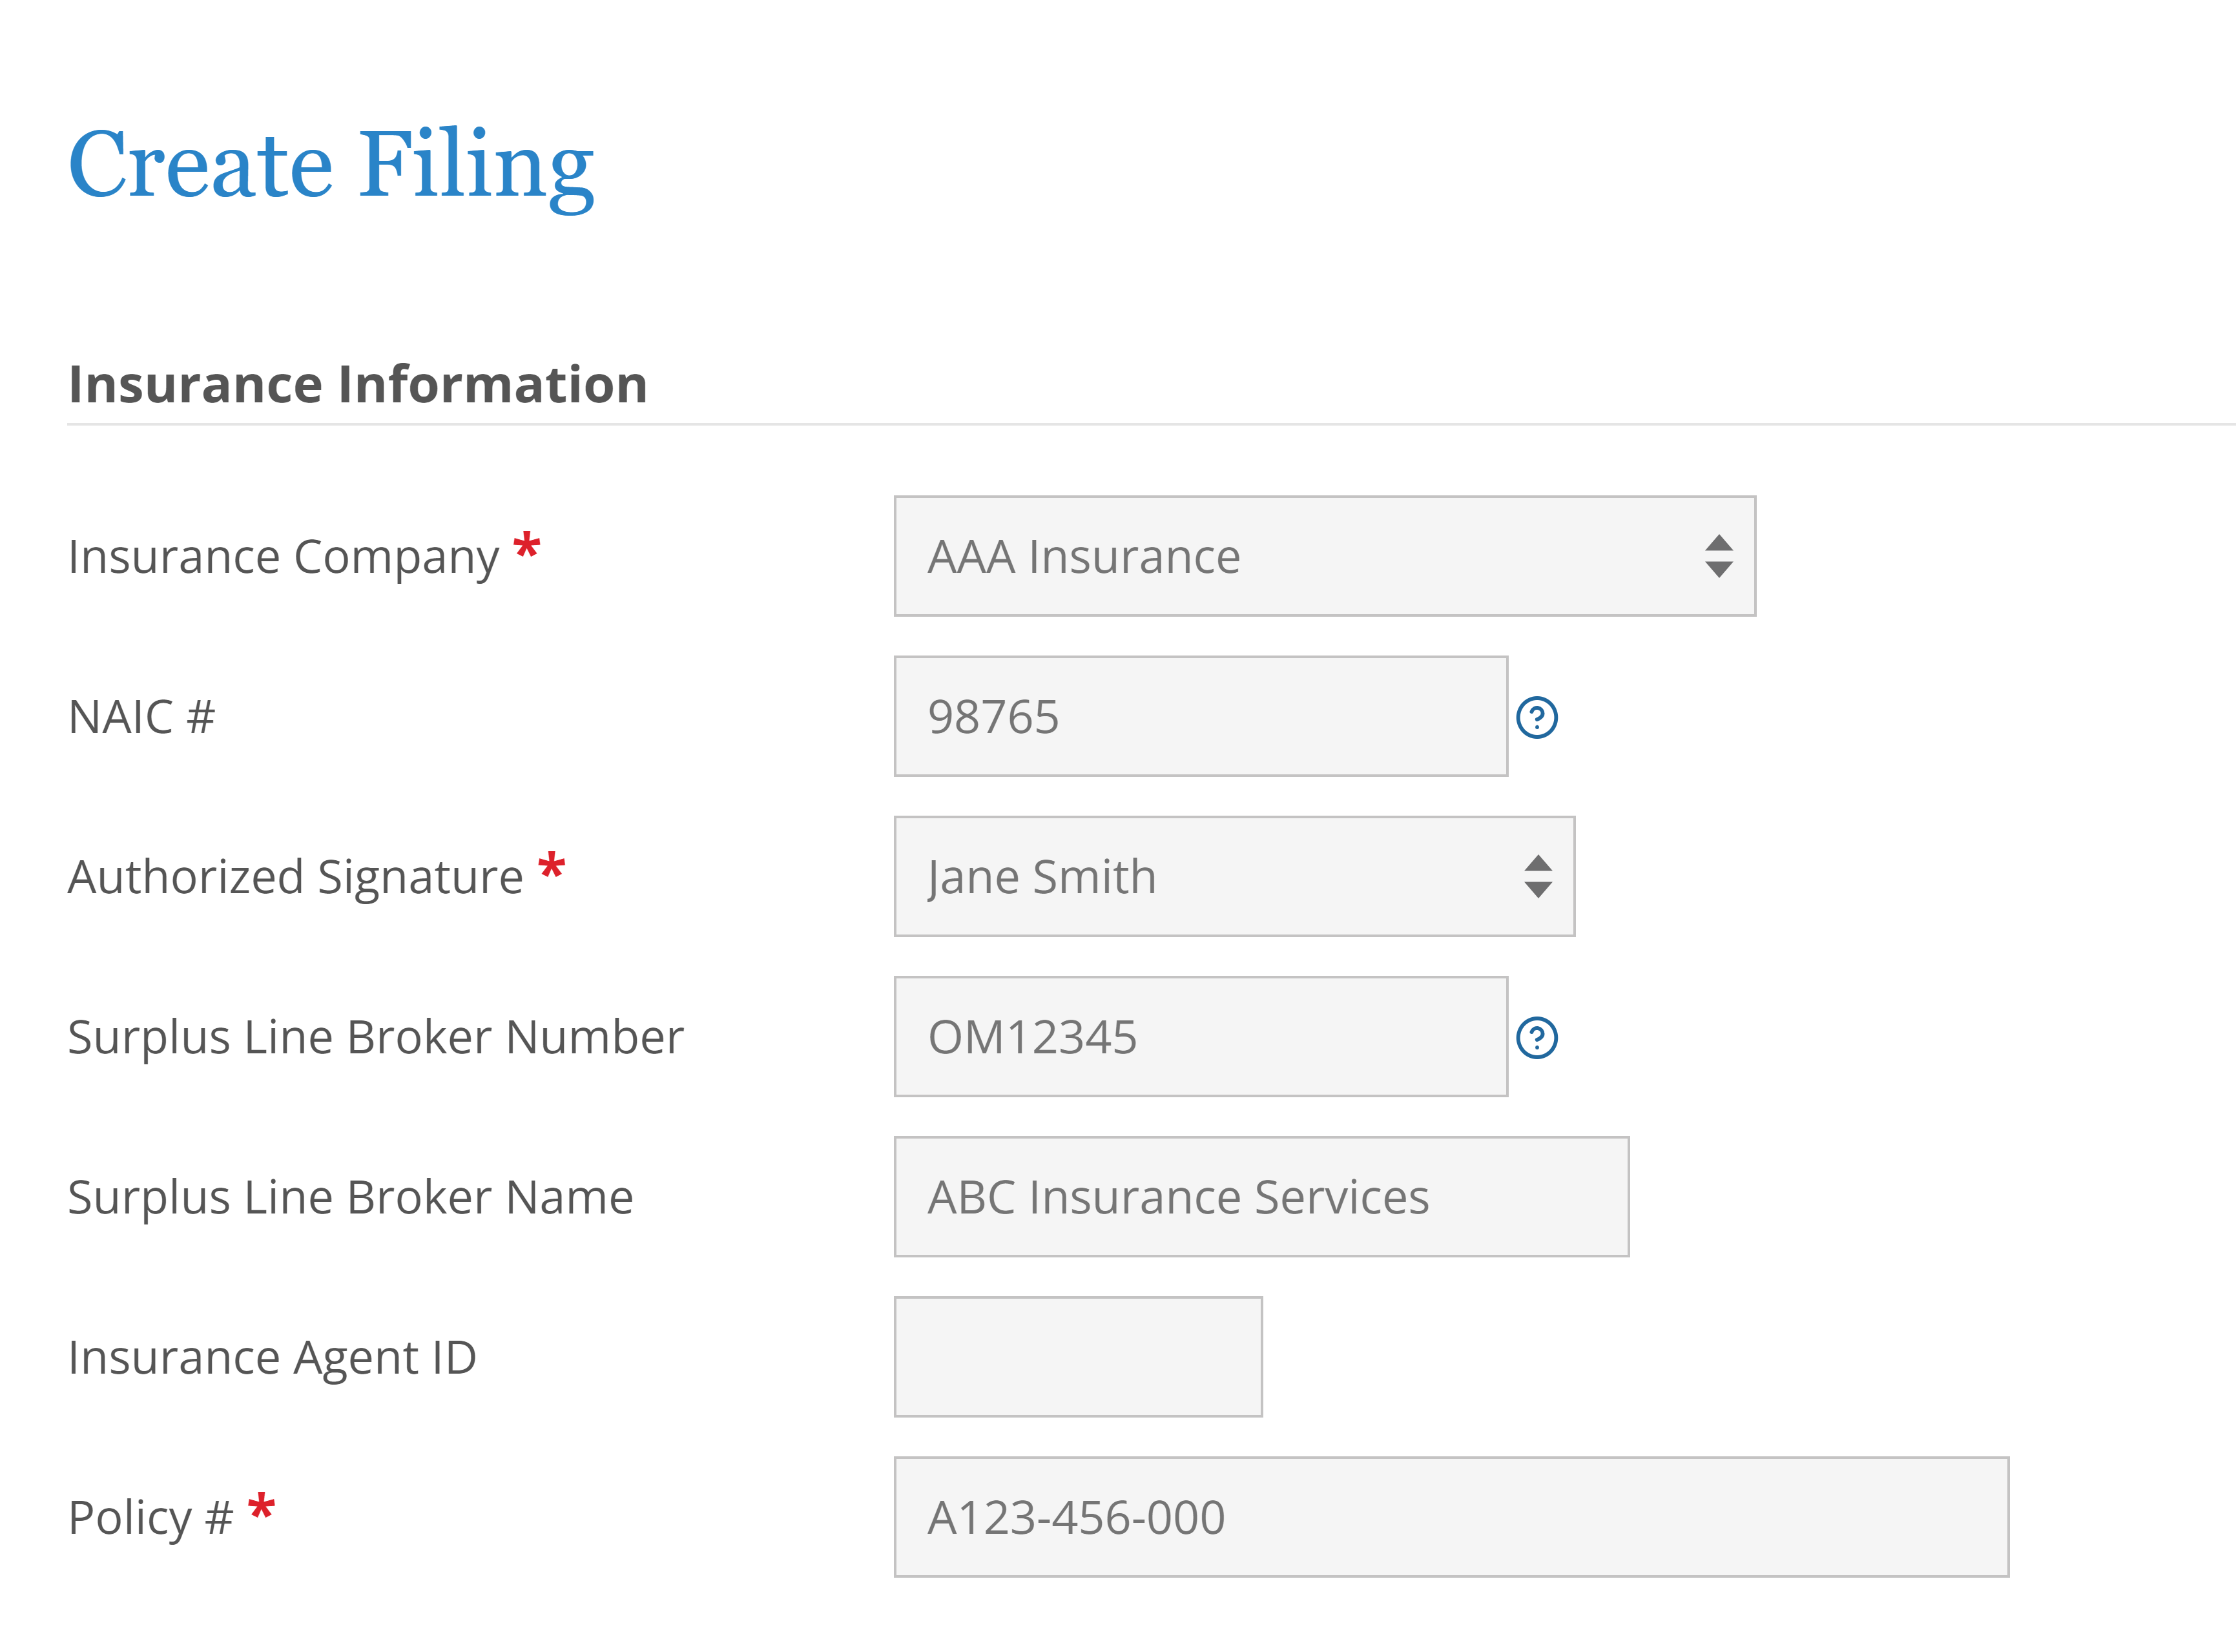 Screen shot showing form selections for MCP 65 filing by non-admitted insurers.